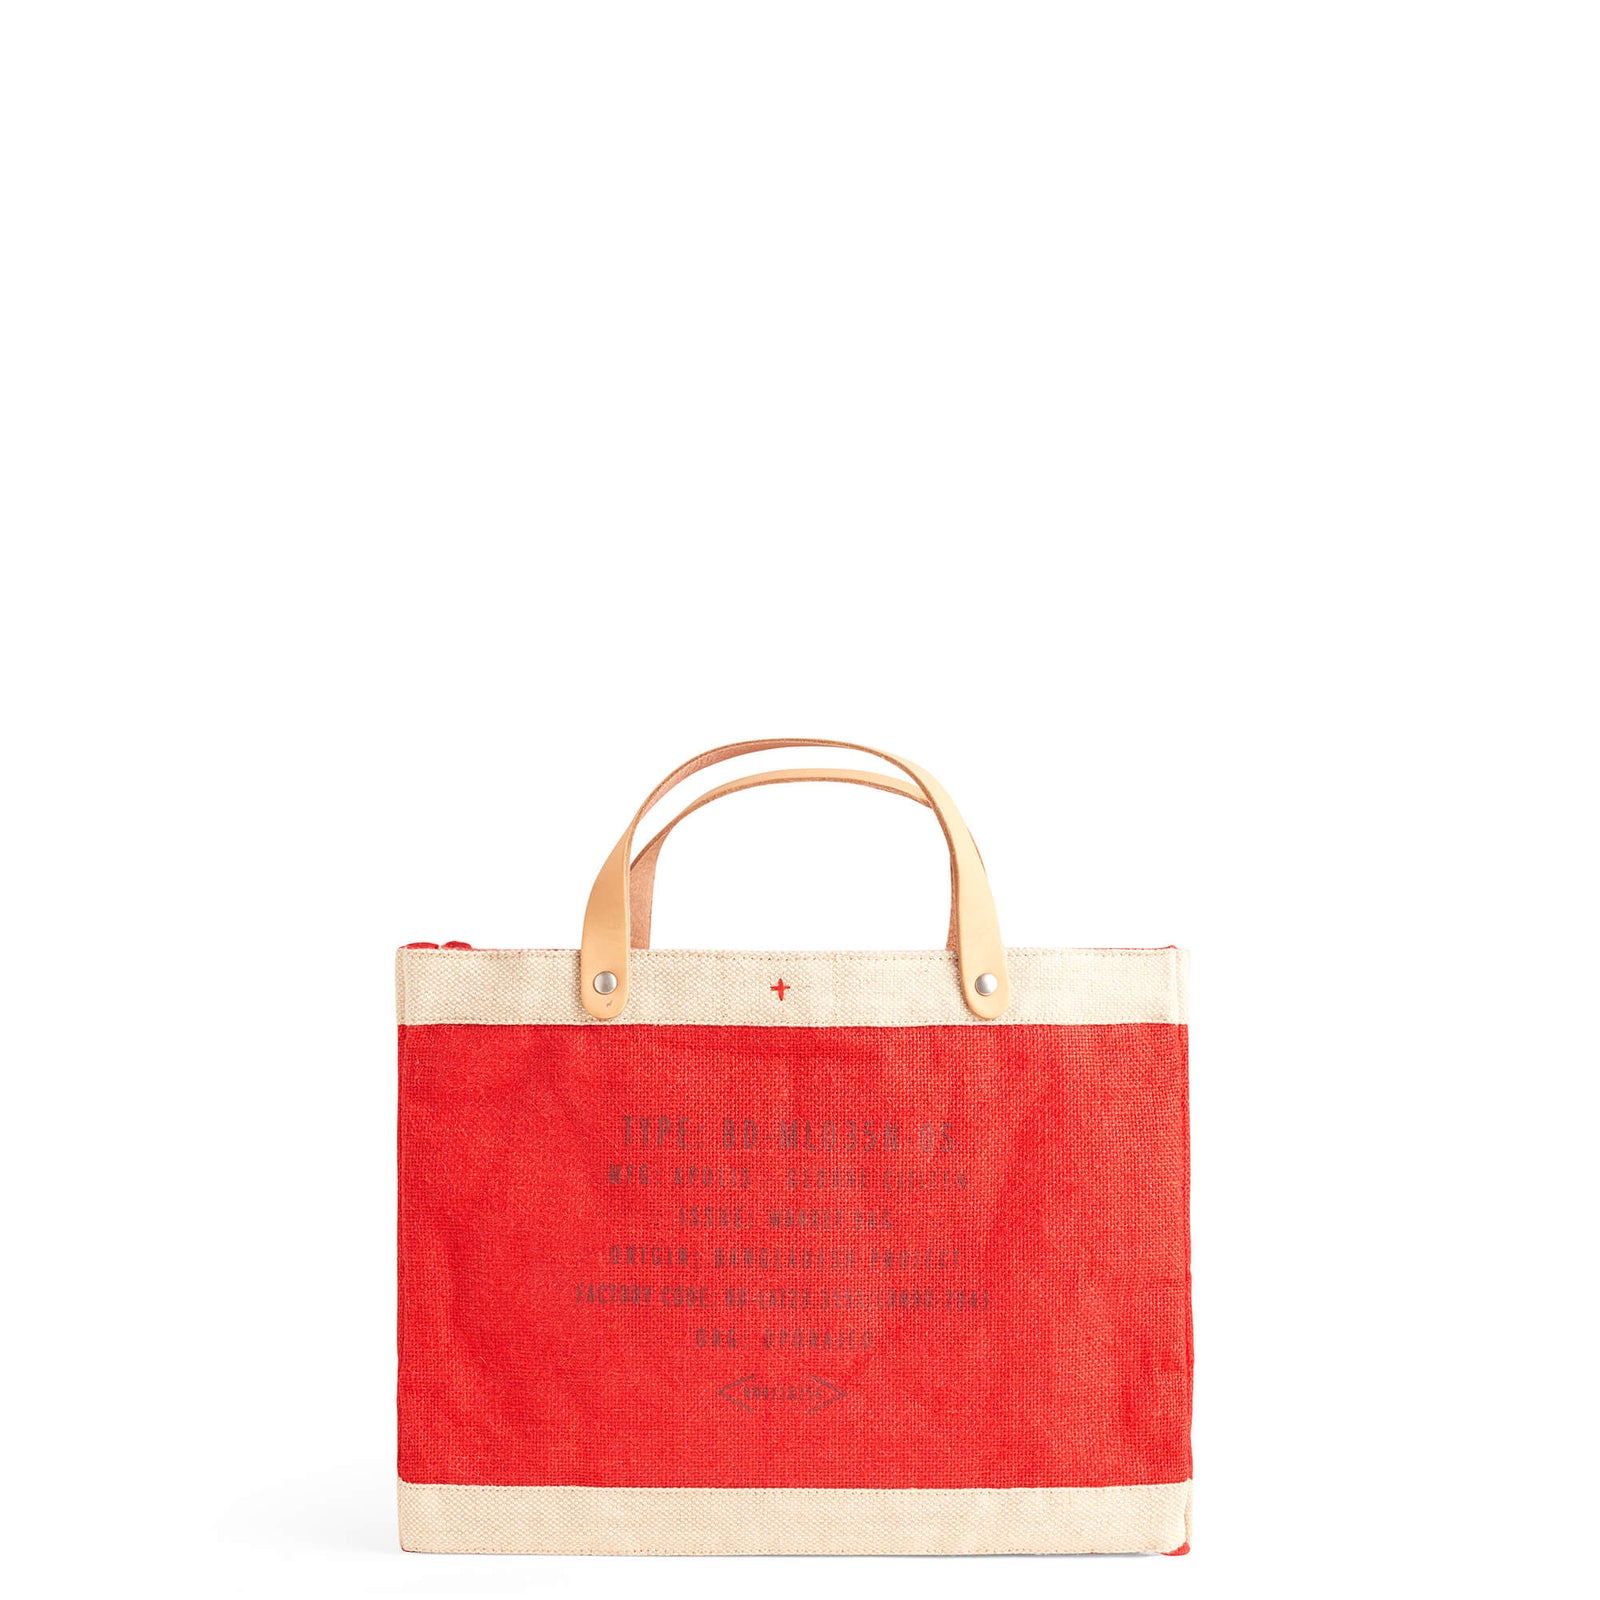 Customized Petite Market Bag in Red - Wholesale